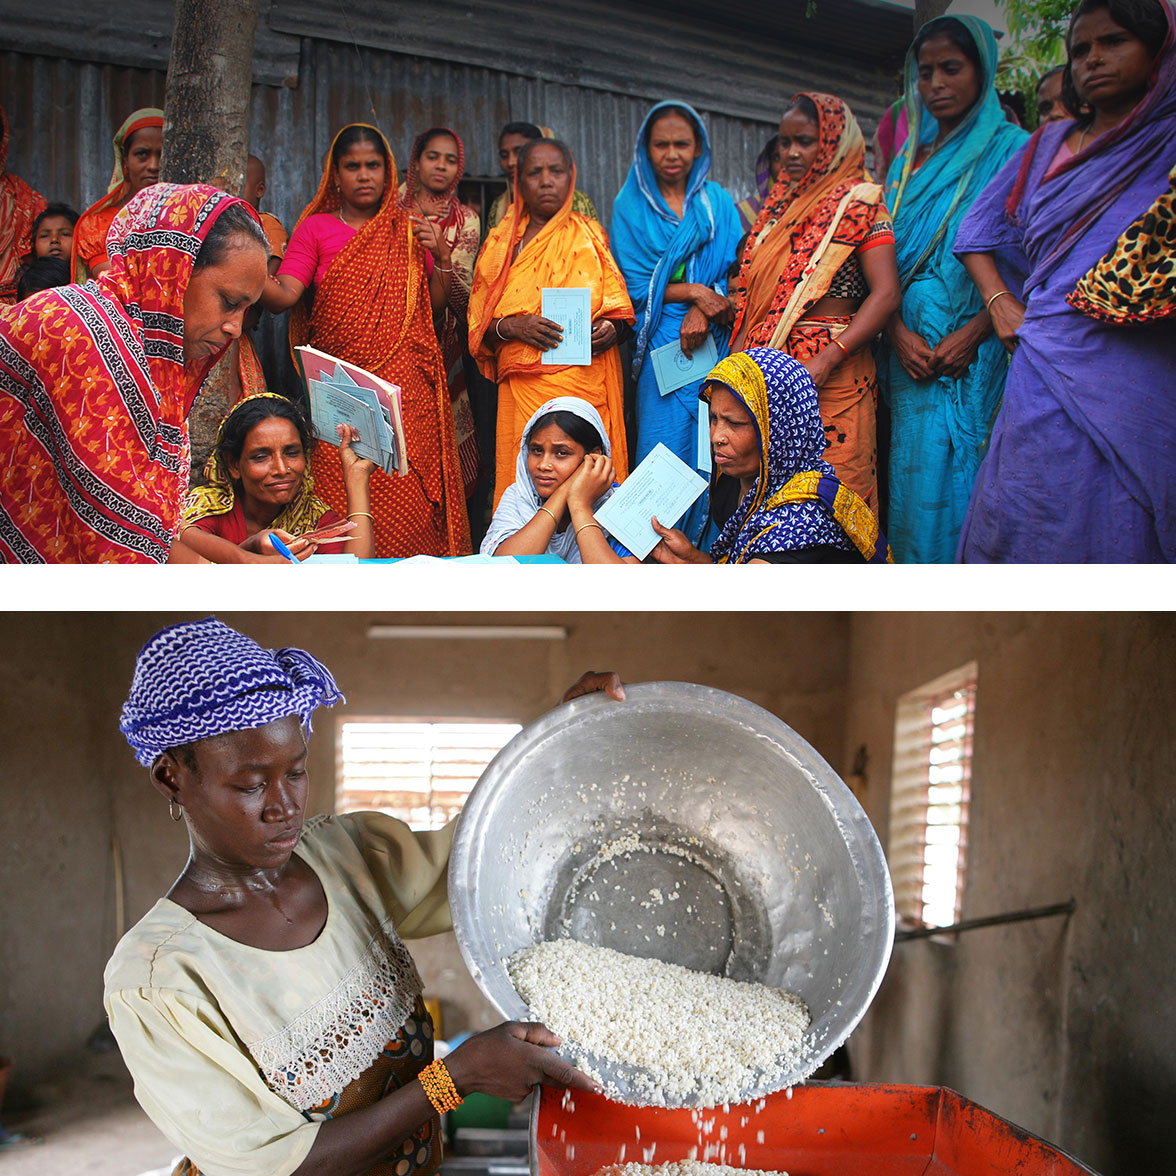 Images of women learning and cooking